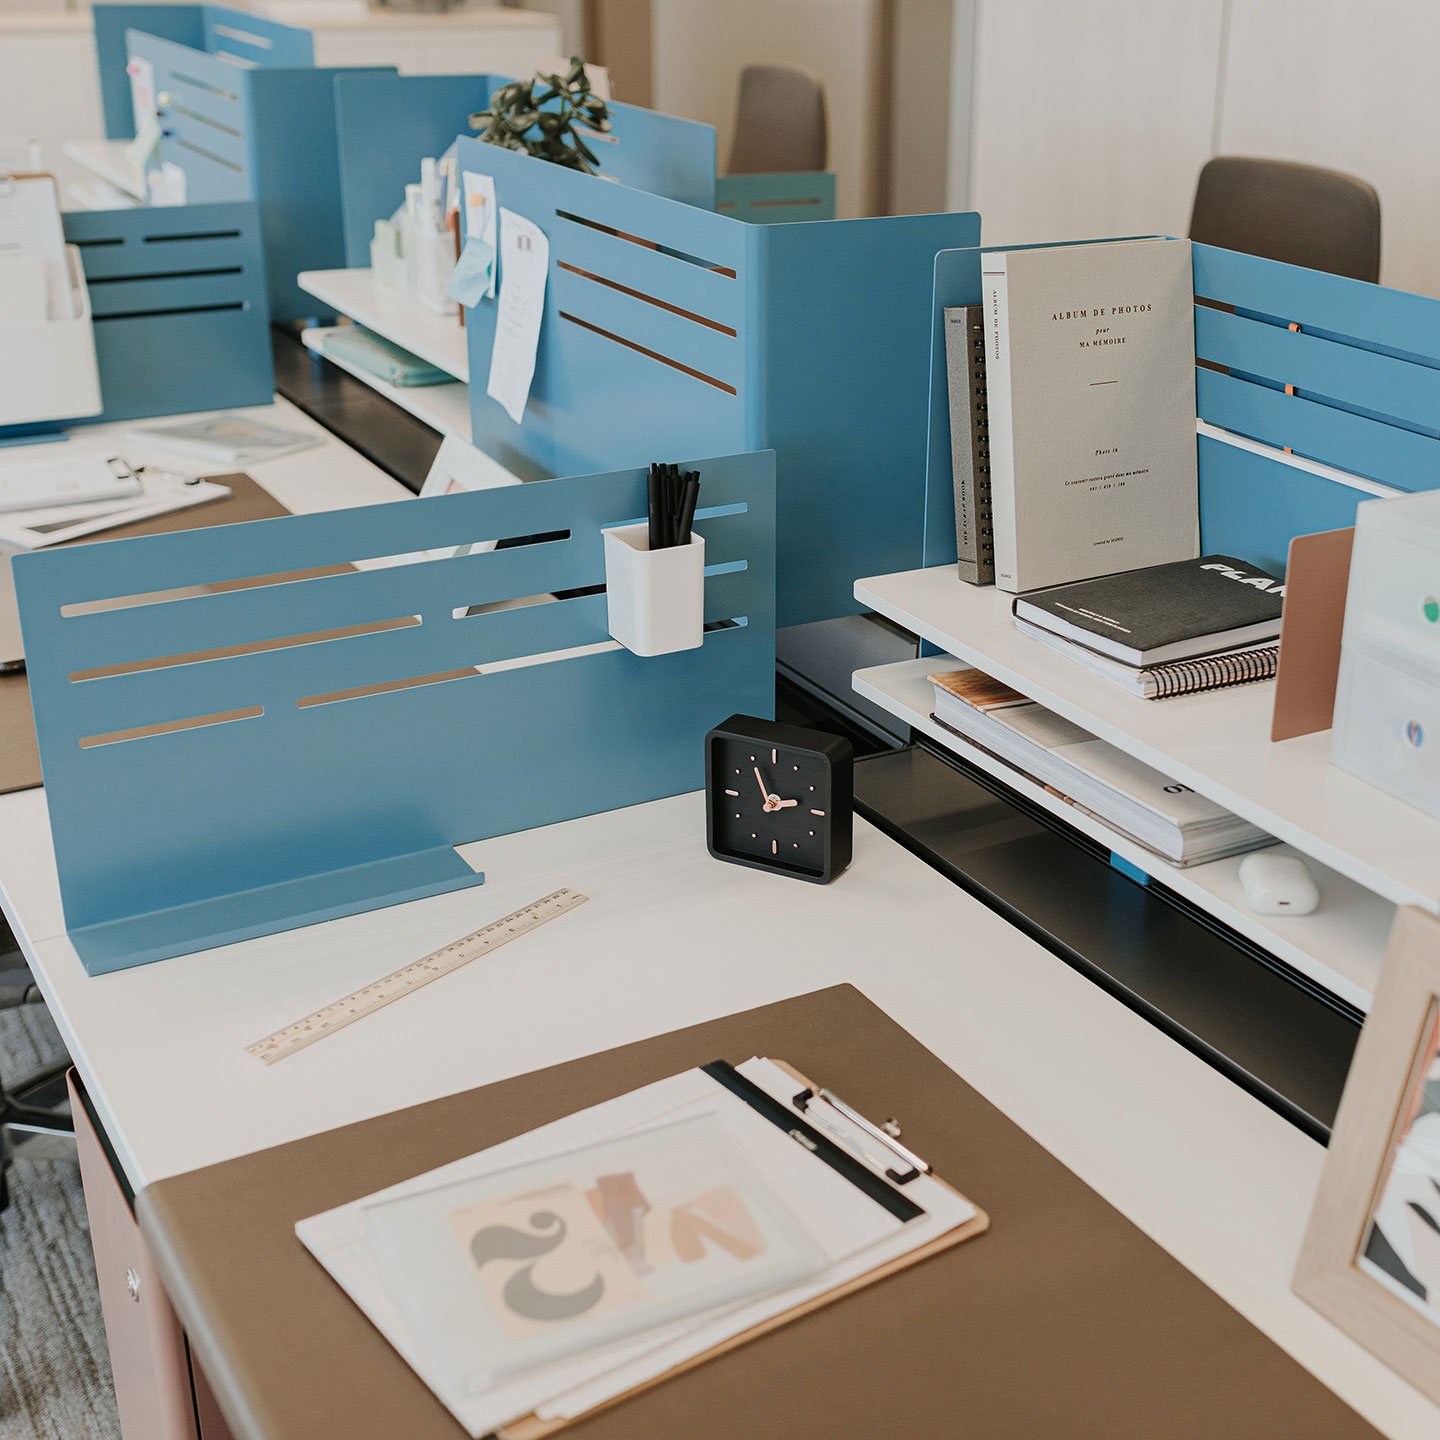 Haworth Intuity Workspace divider in blue color separating desks with papers on them